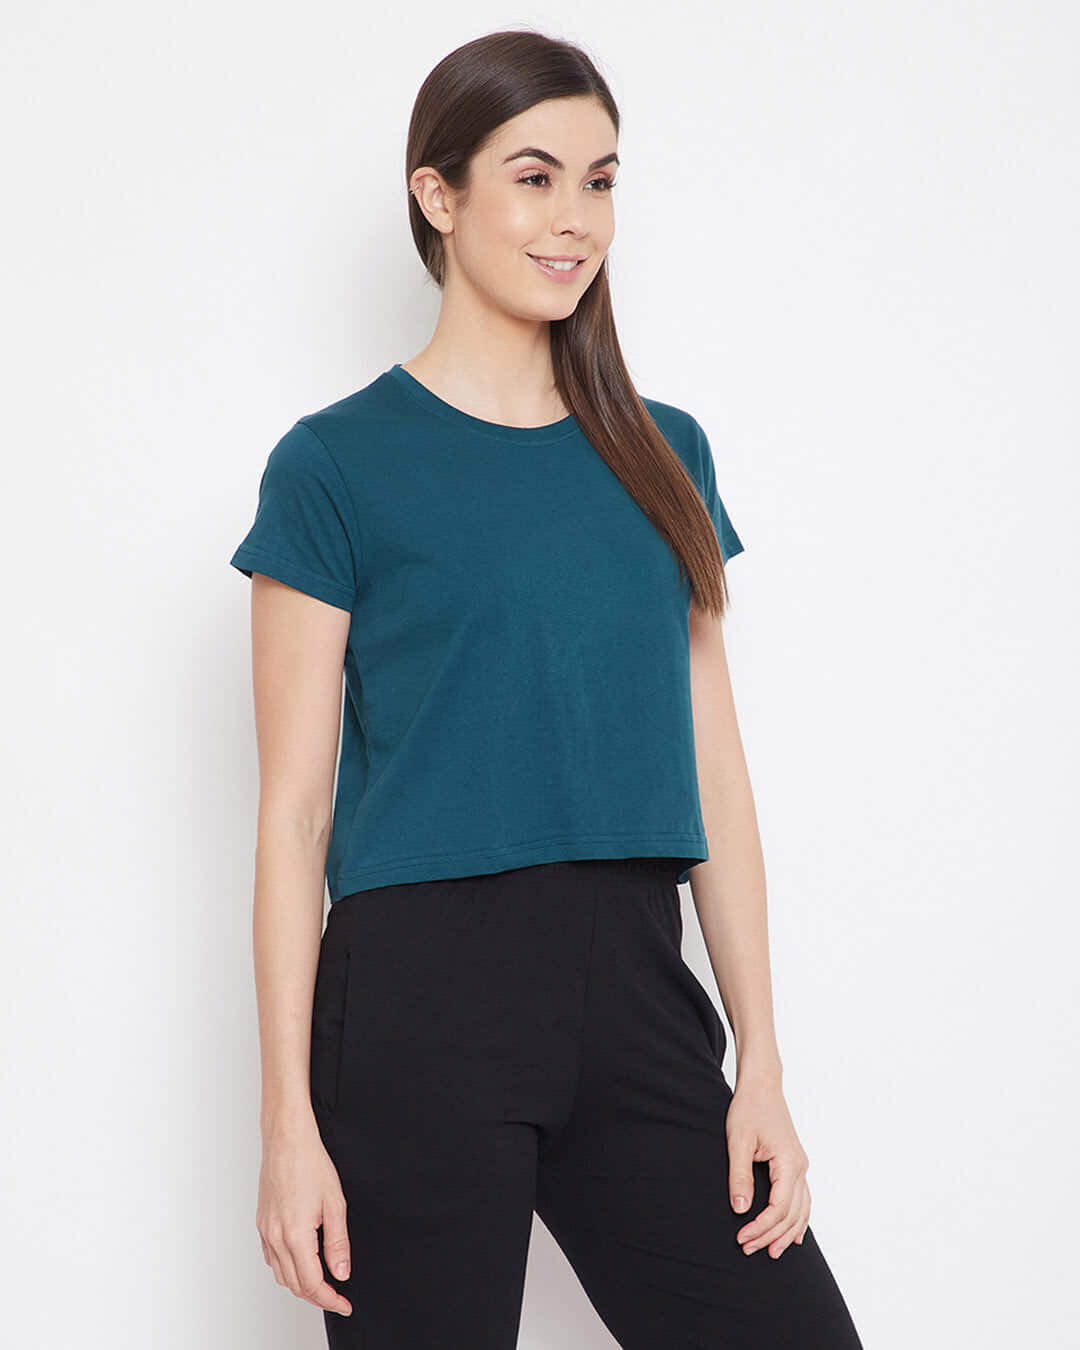 Shop Chic Basic Cropped Sleep Women's Tee in Teal-Back